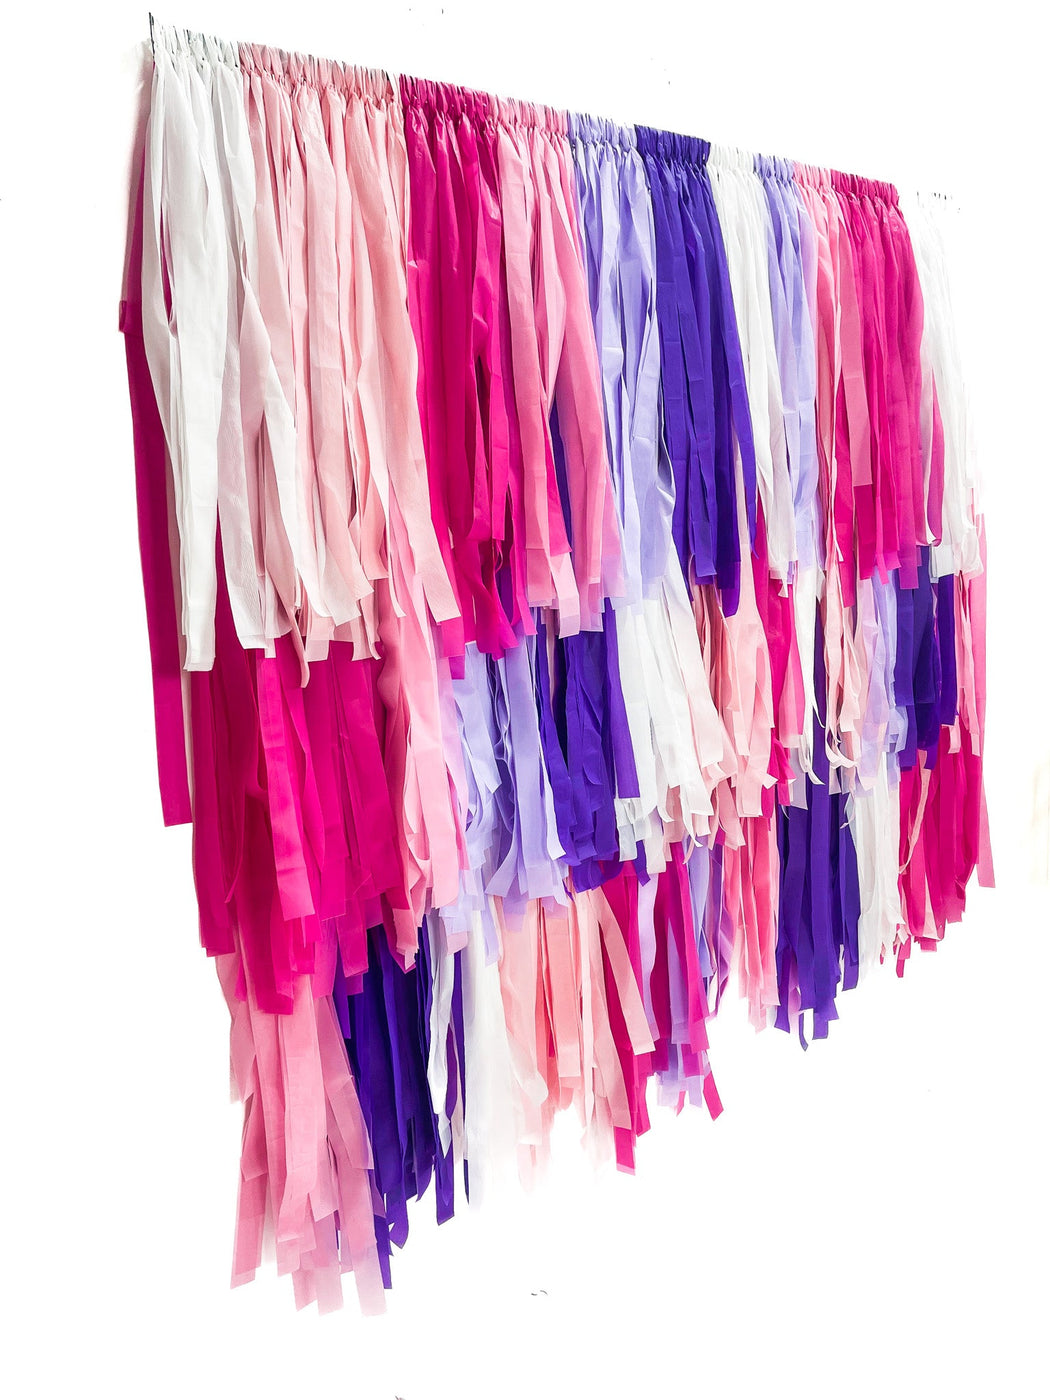 Dance Party Fringe Backdrop - Oh My Darling Party Co-dancedefaultPINK BACKDROP #Fringe_Backdrop#